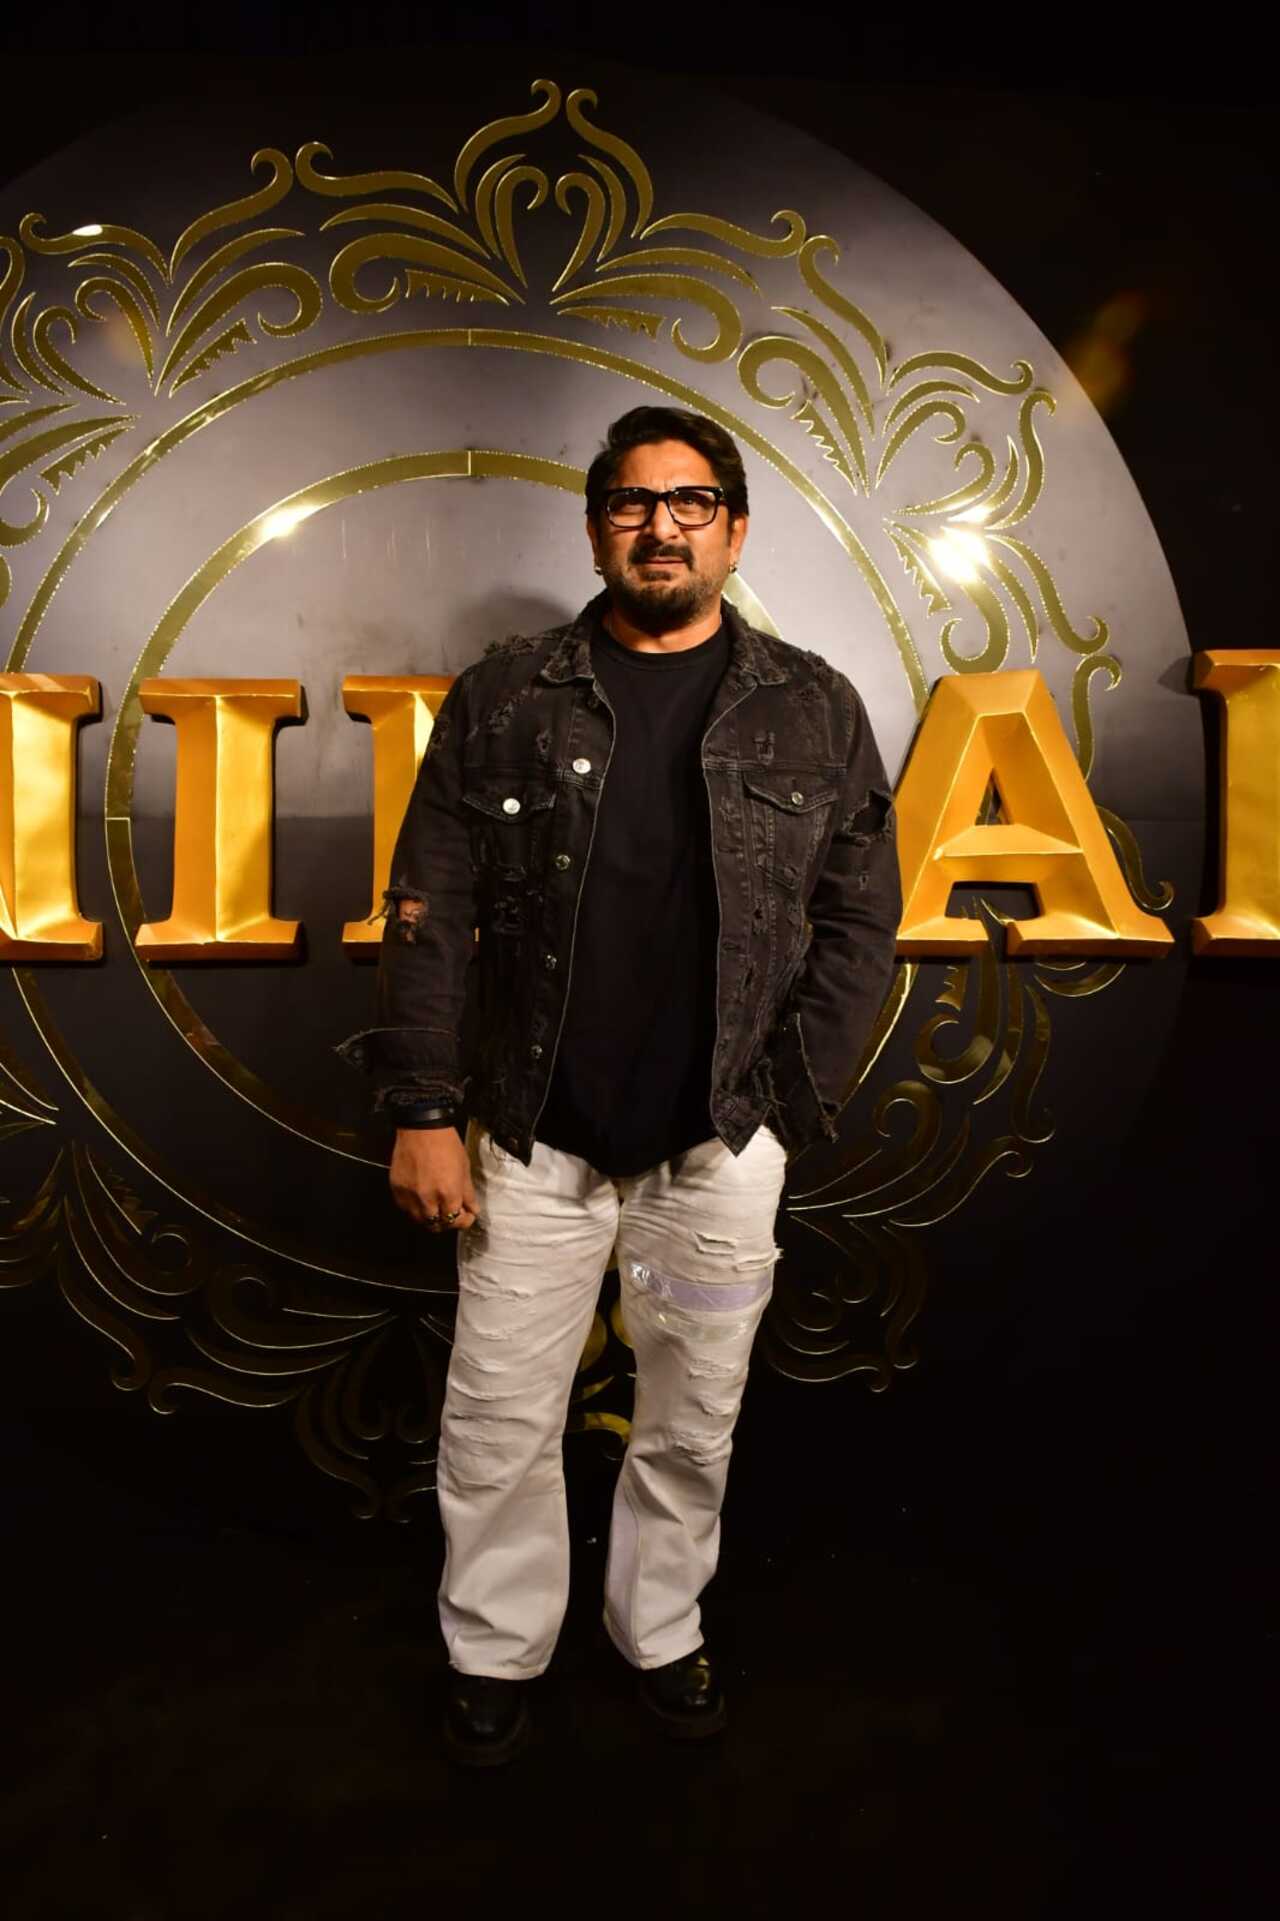 Arshad Warsi was also at the event